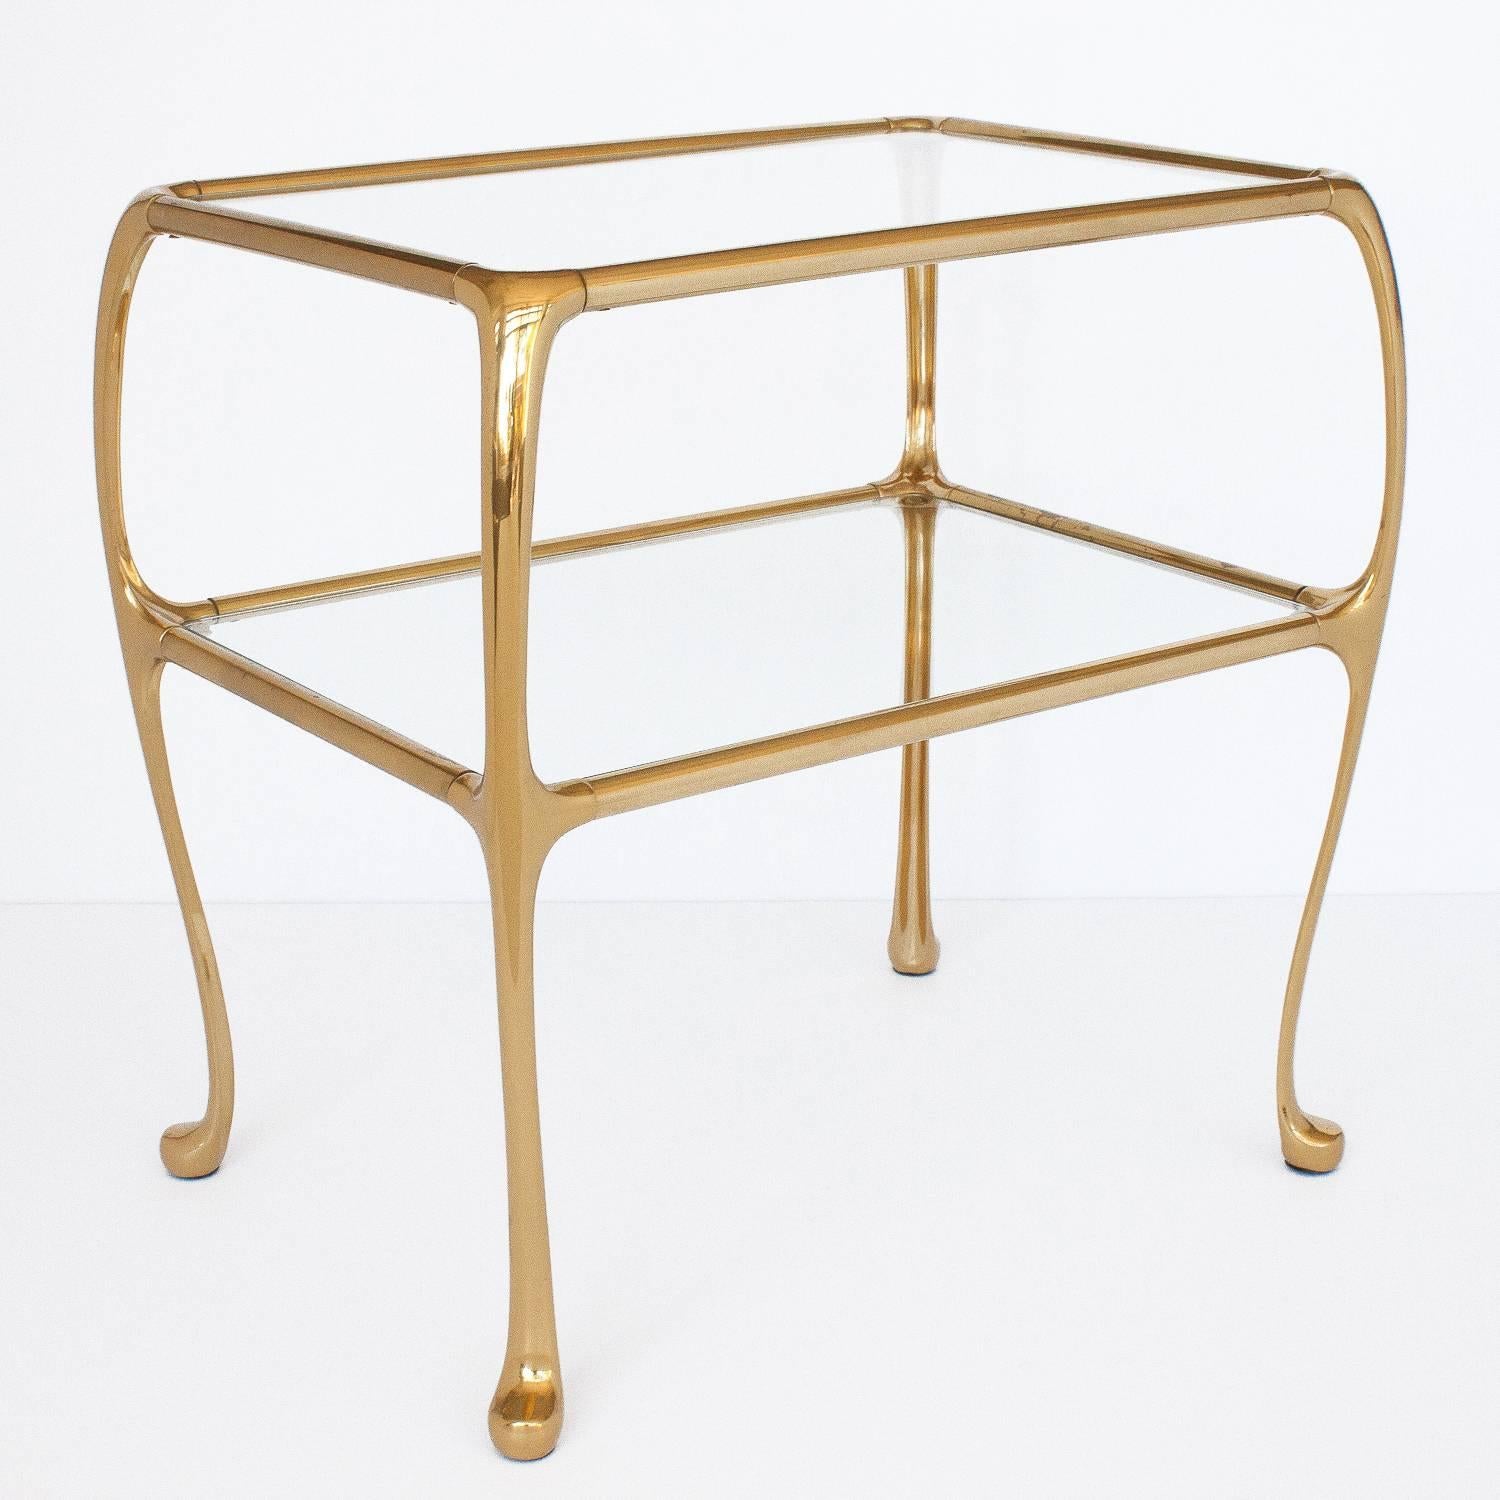 Mid-20th Century Pair of Gaudi Inspired Brass Two-Tier End Tables